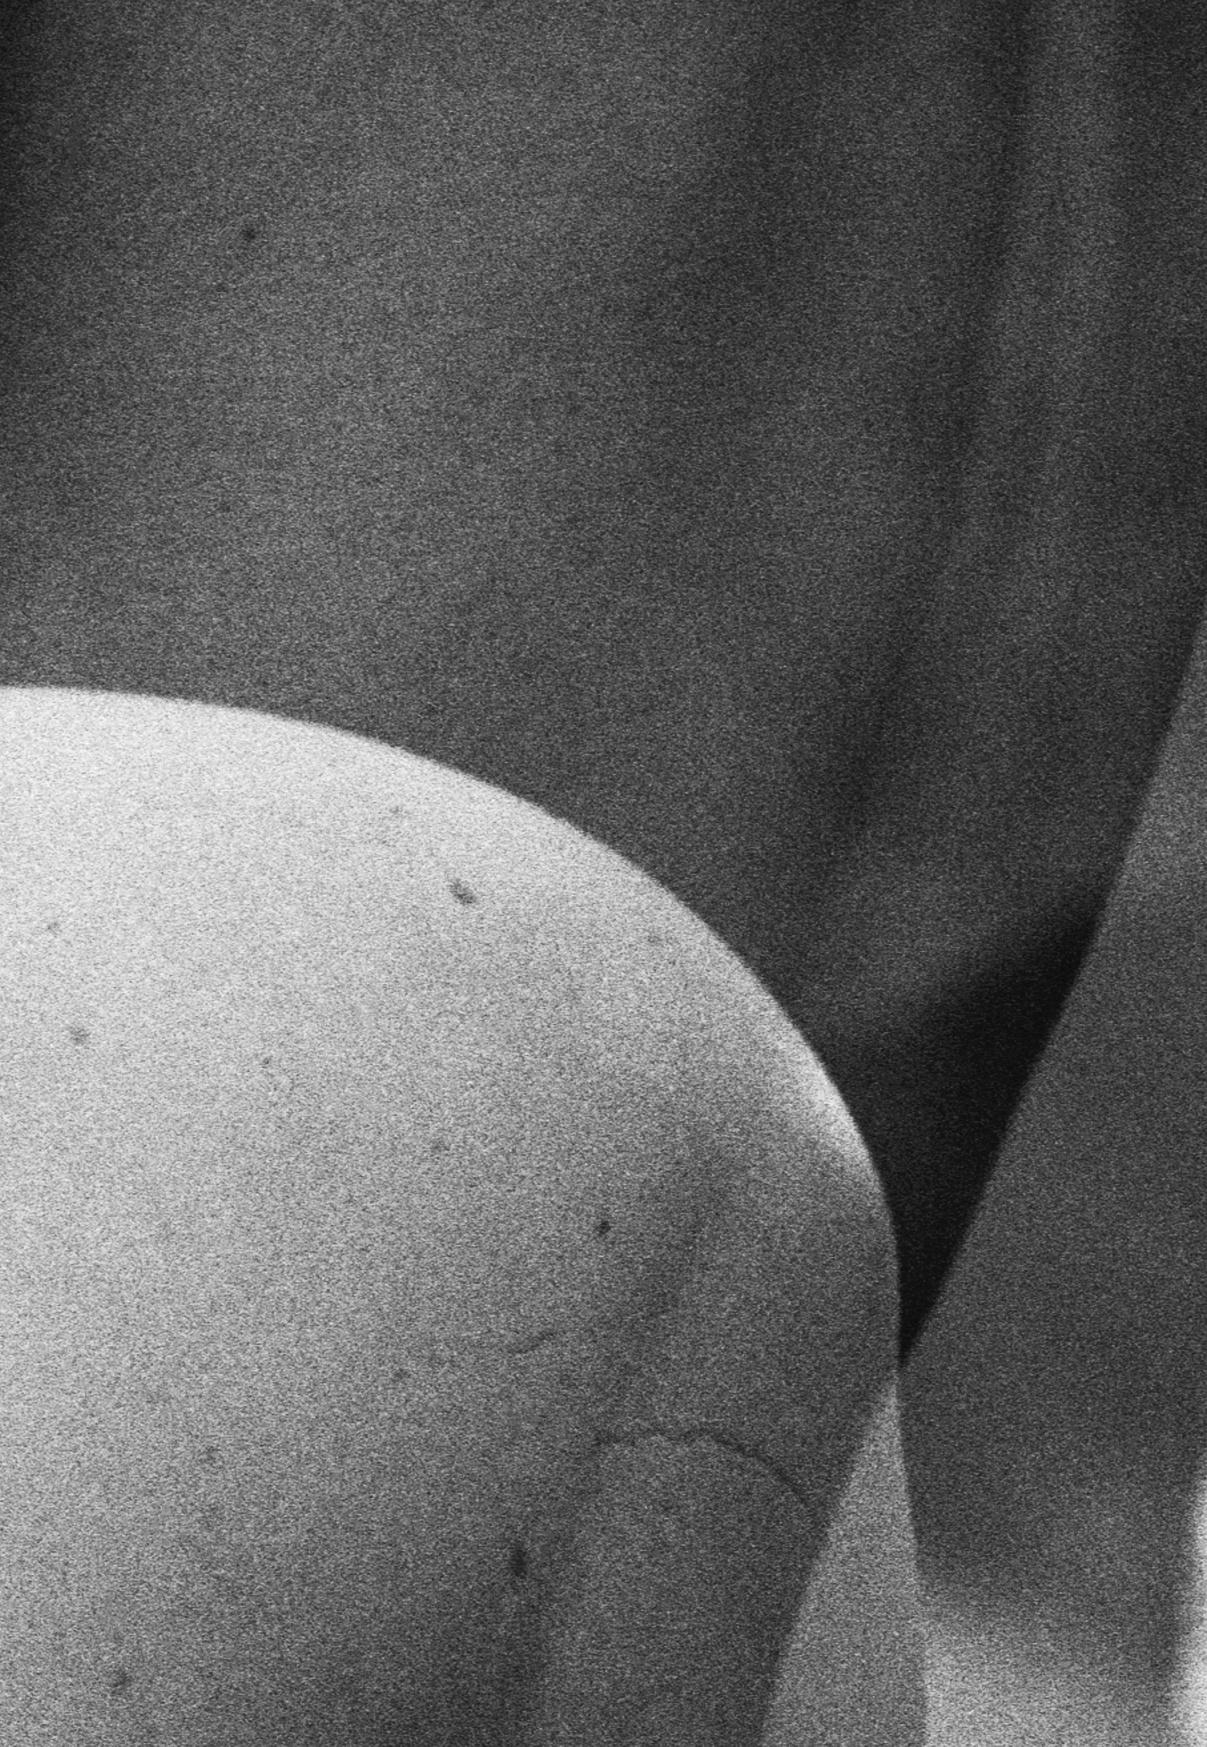 Untitled (Touching) – Lina Scheynius, Black and White, Woman, Body, Nude, Female For Sale 3